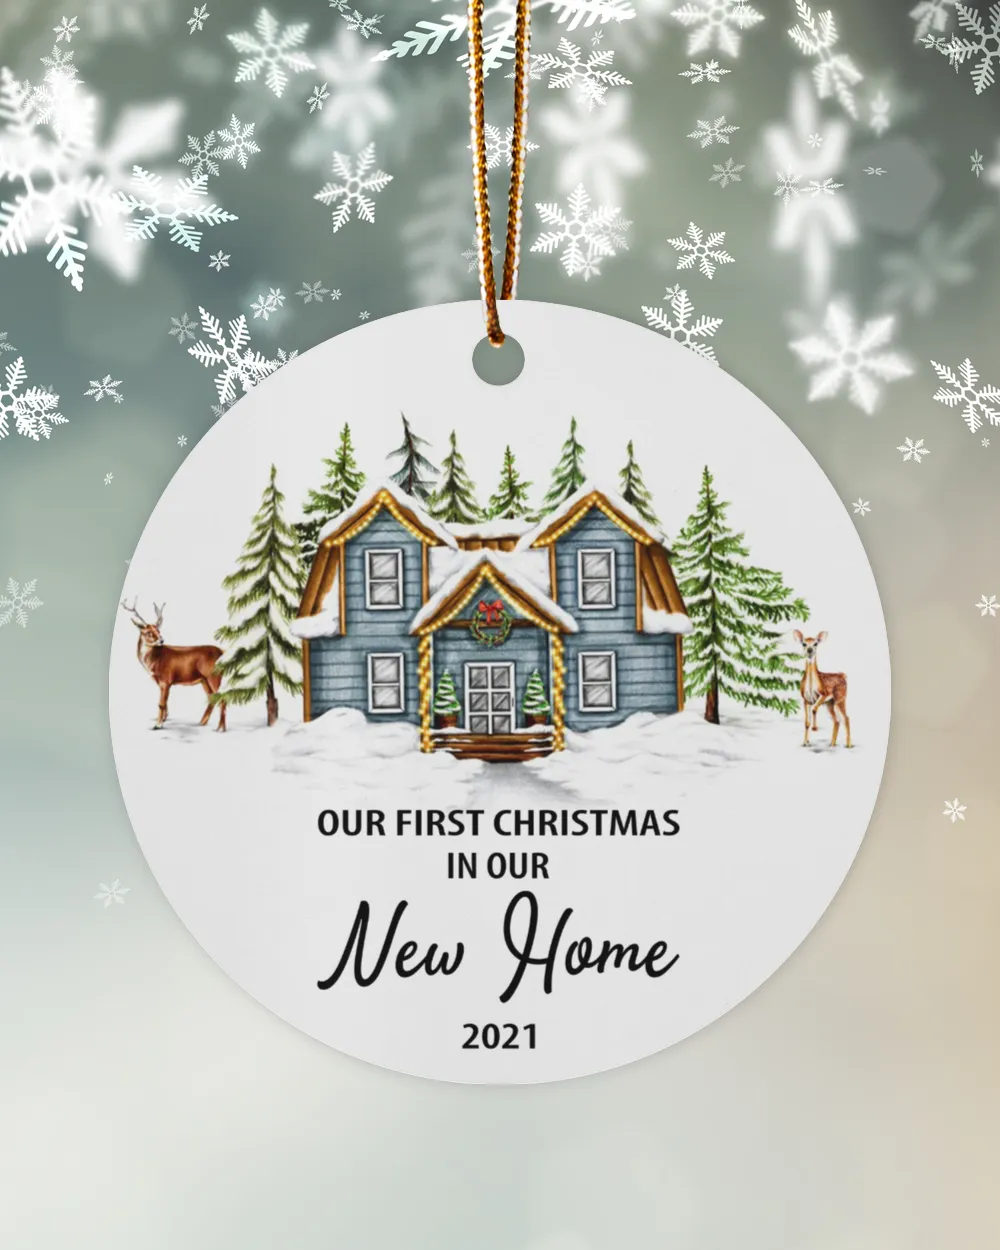 Our First Christmas in Our New Home 2021 Ornament